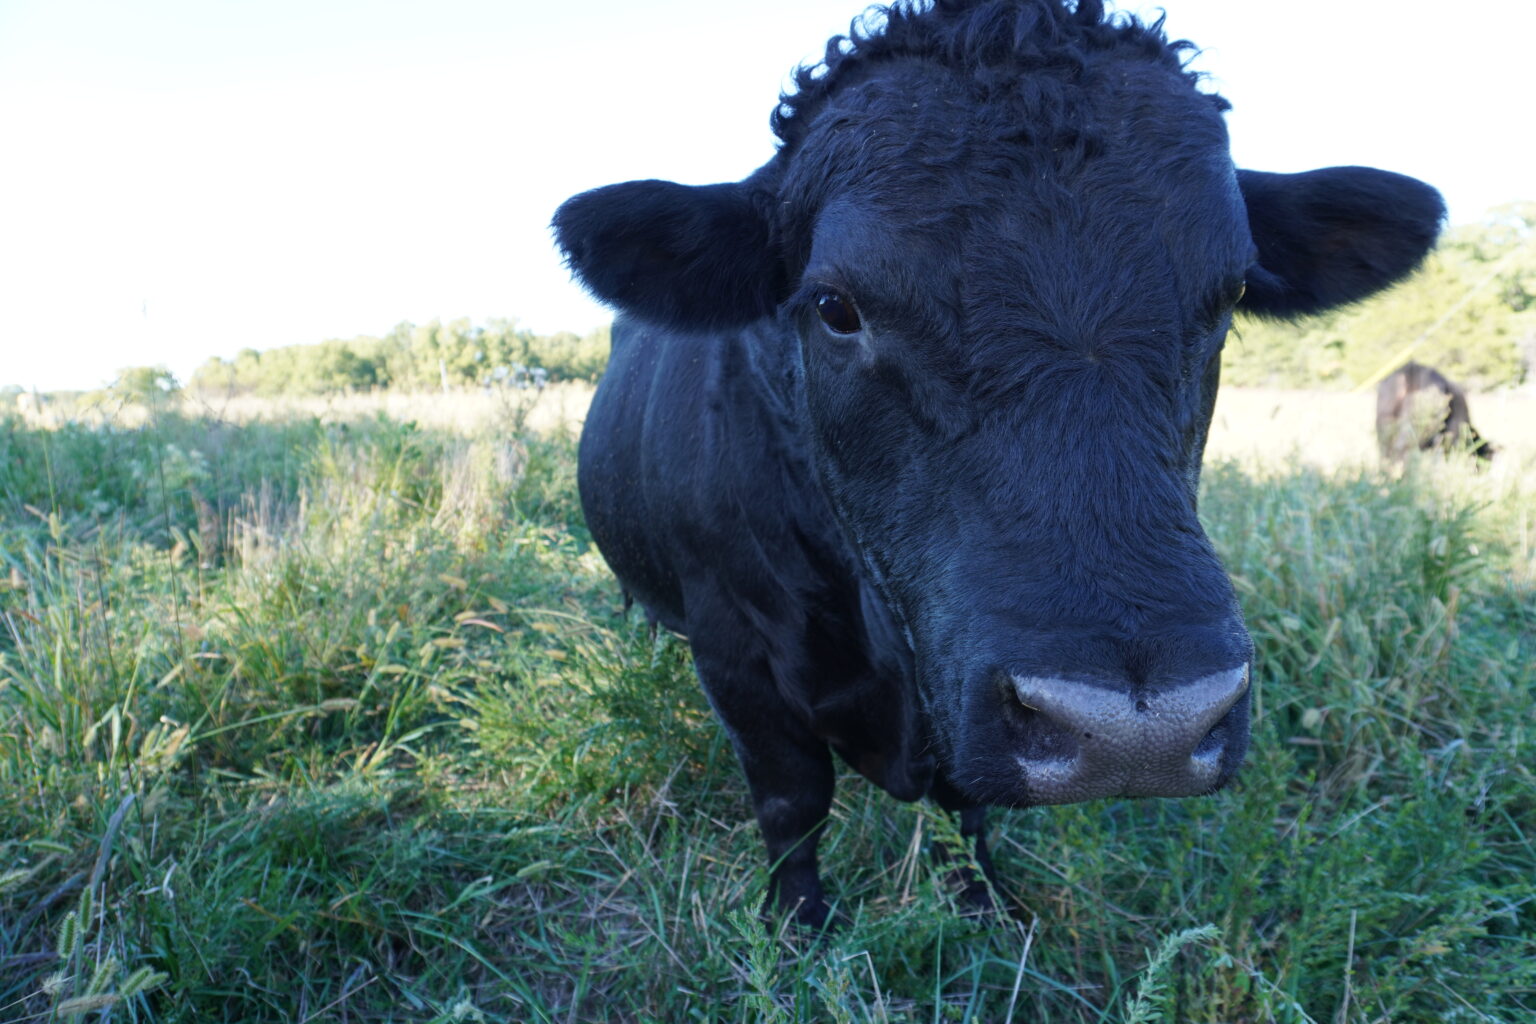 Black bull looking at the camera in a field